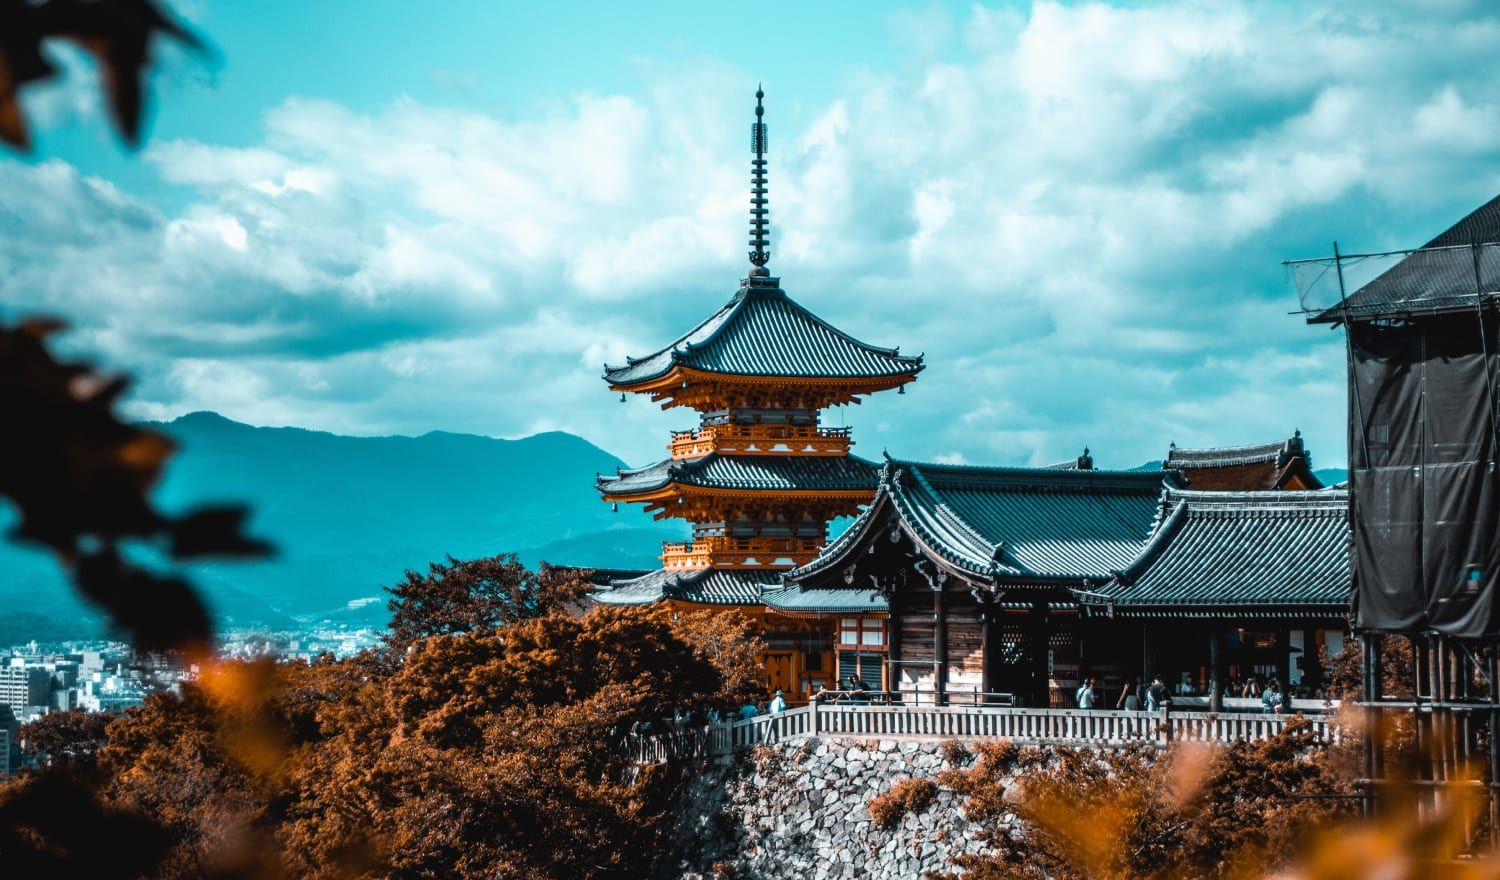 A temple in Kyoto towering over a silver shrine